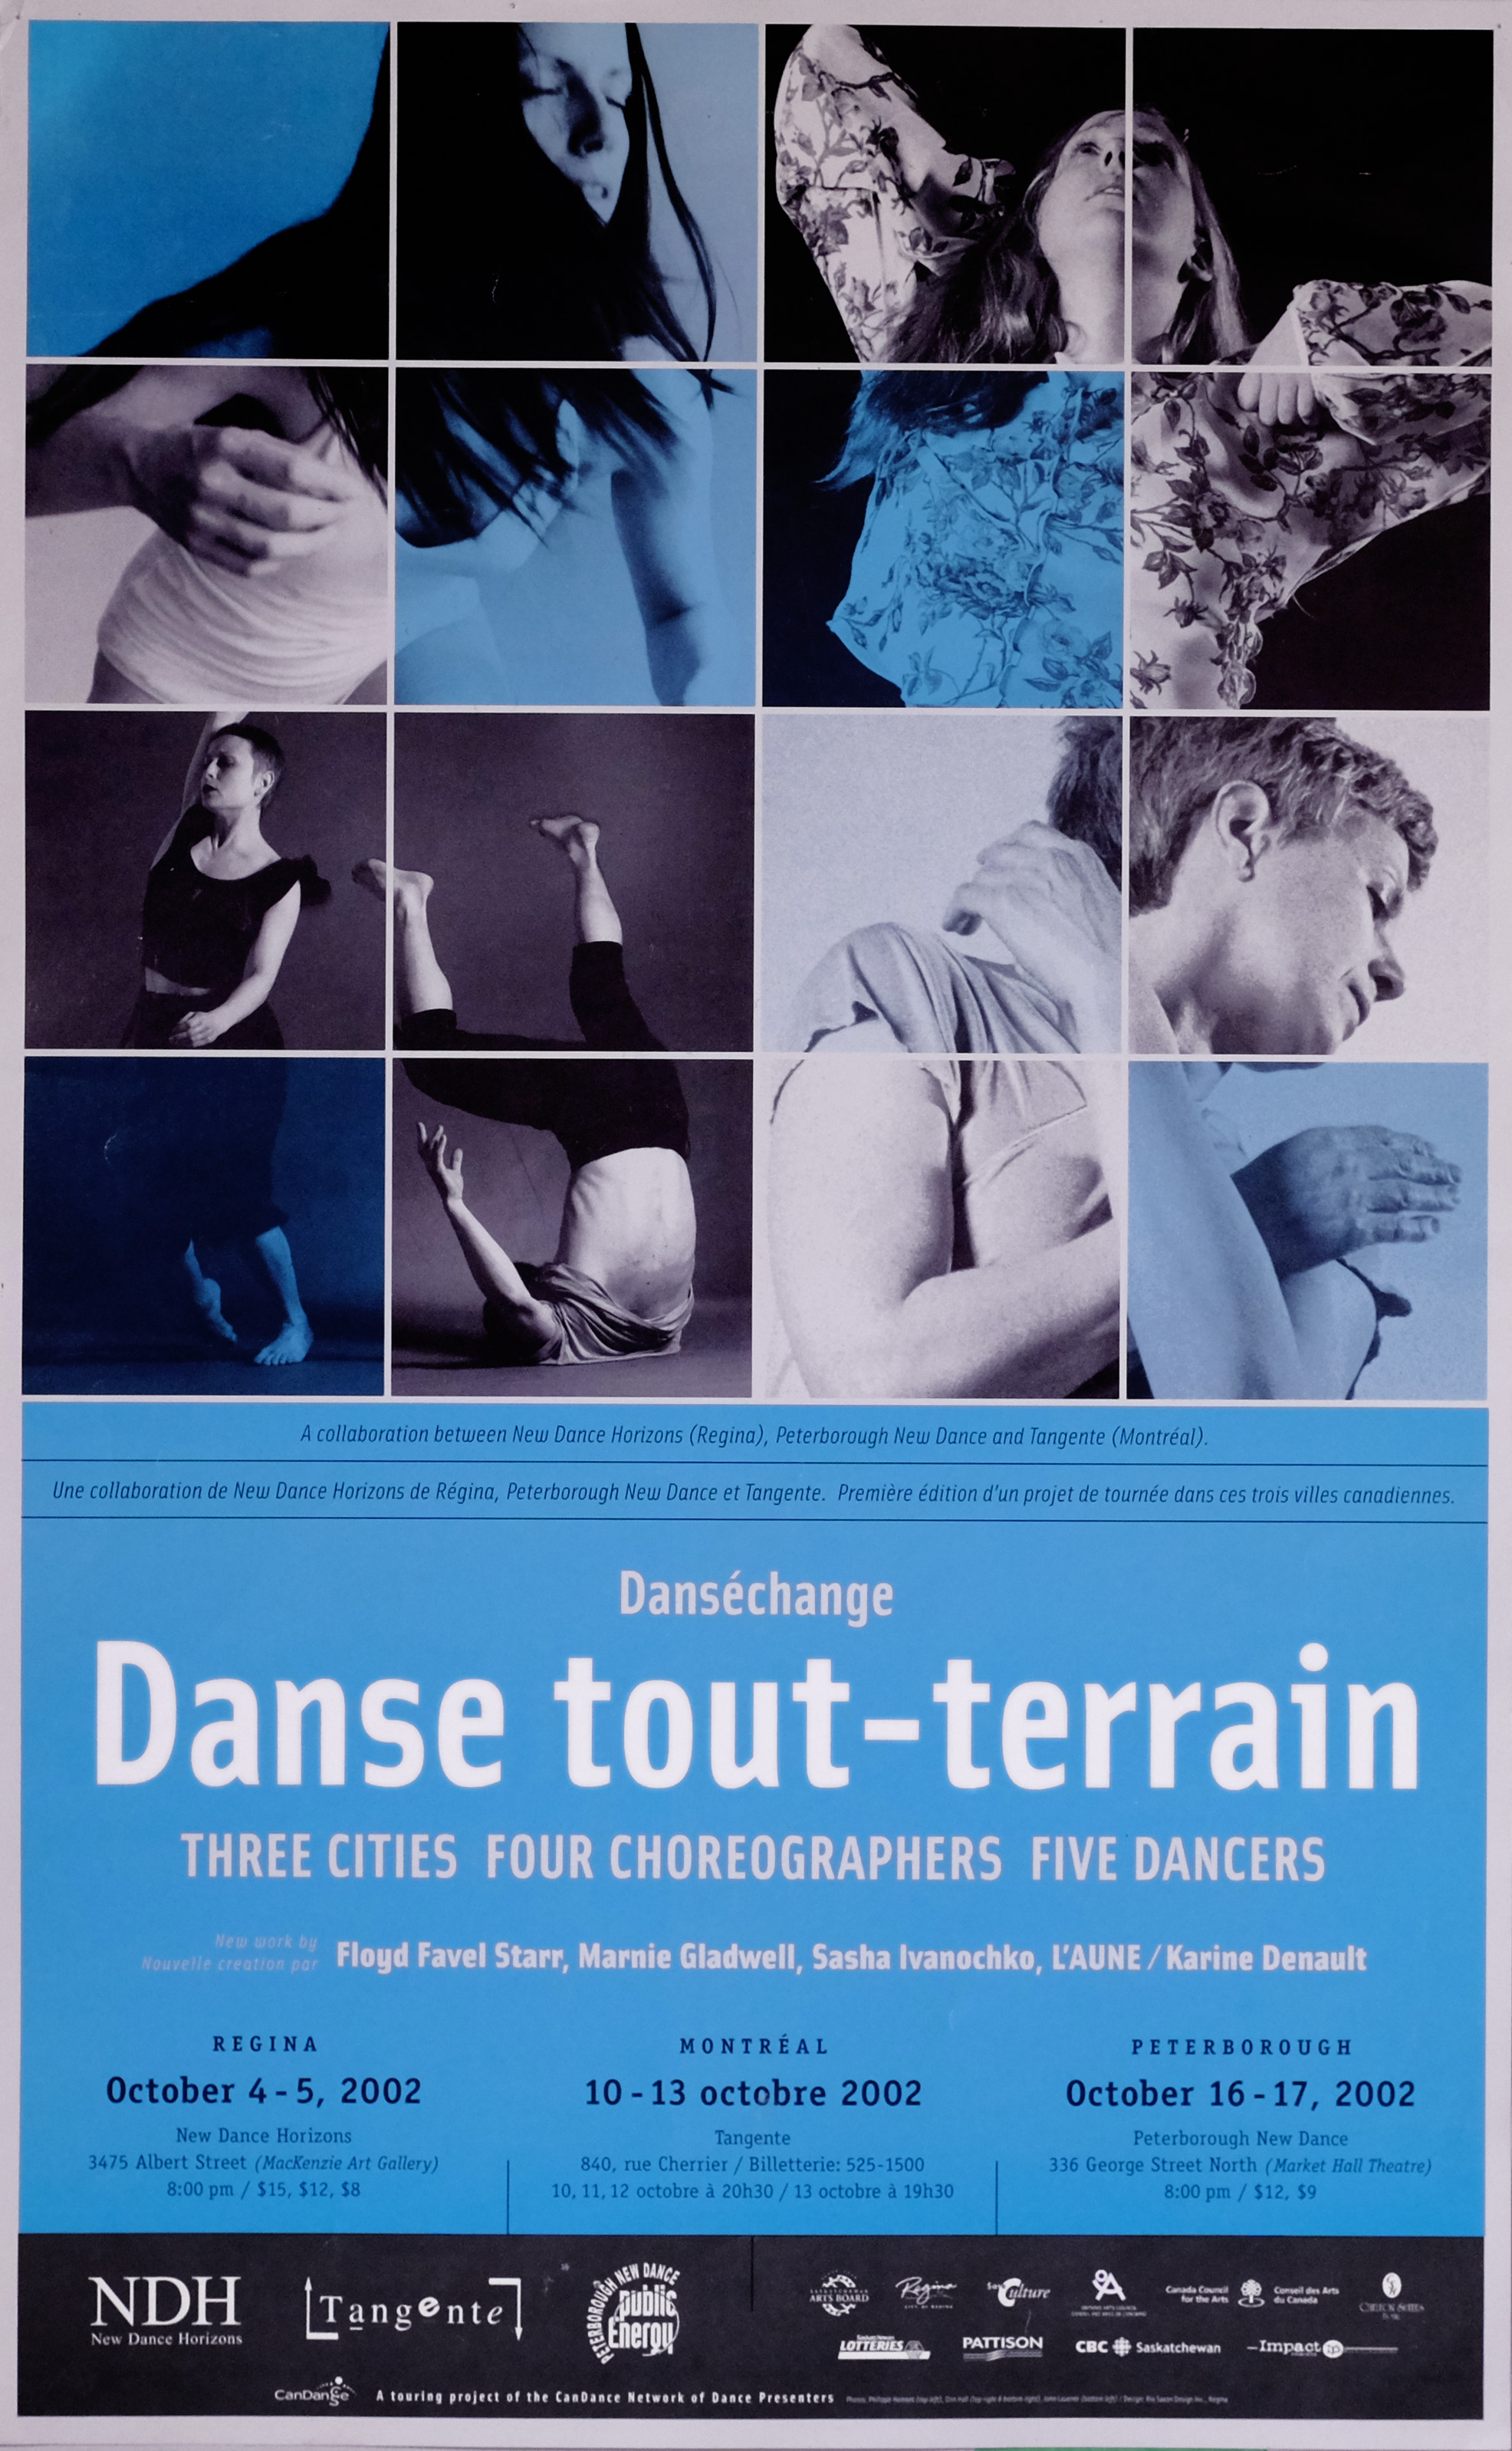 CanDance Exchange Project: Danse tout-terrian Poster for Danse tout-terrain in the photo.